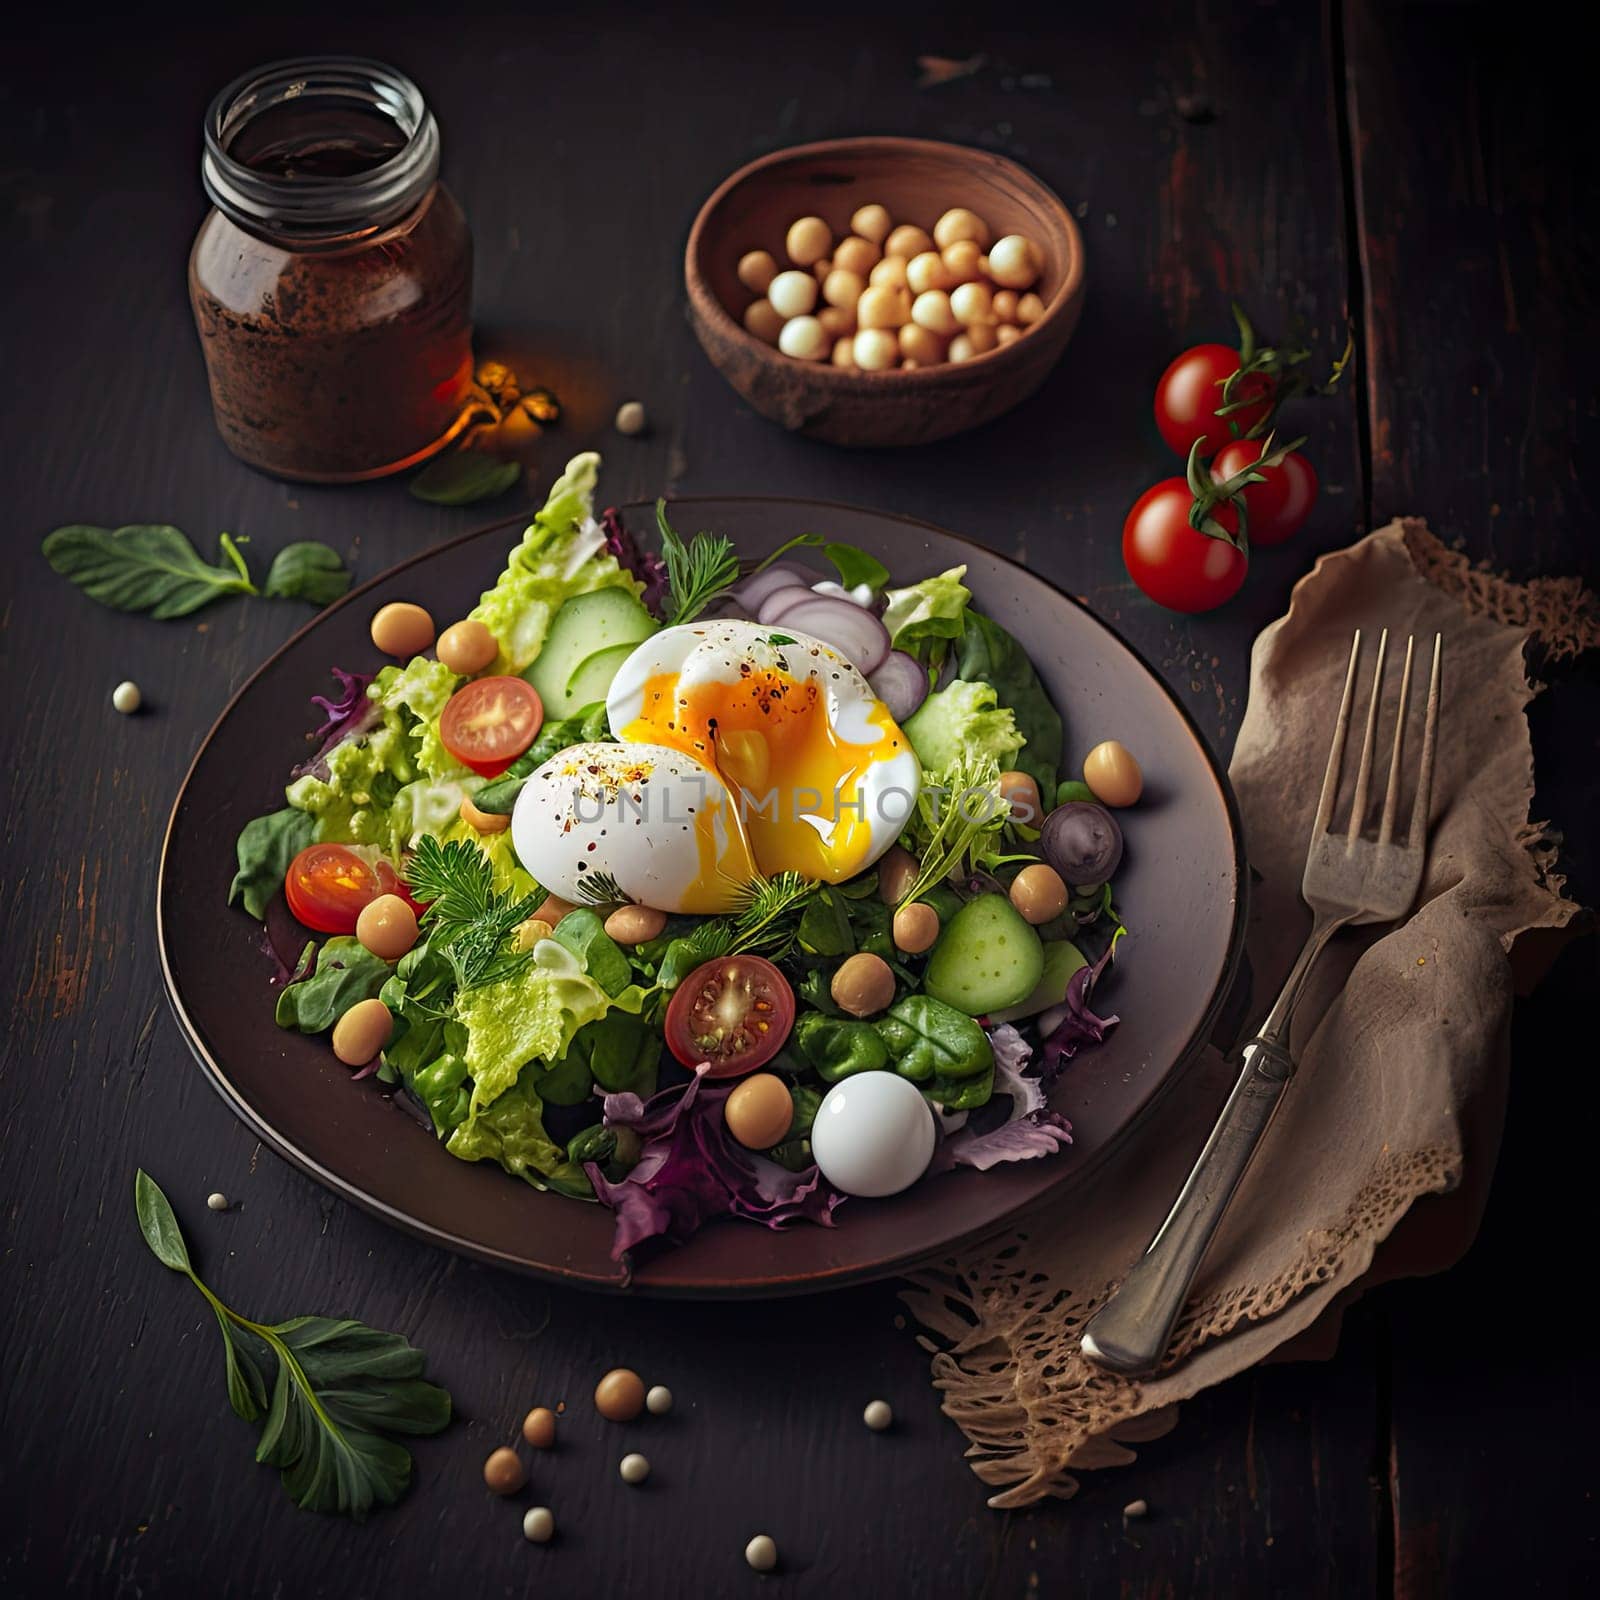 Healthy and tasty salad with fresh vegetables, chickpeas and poached egg.